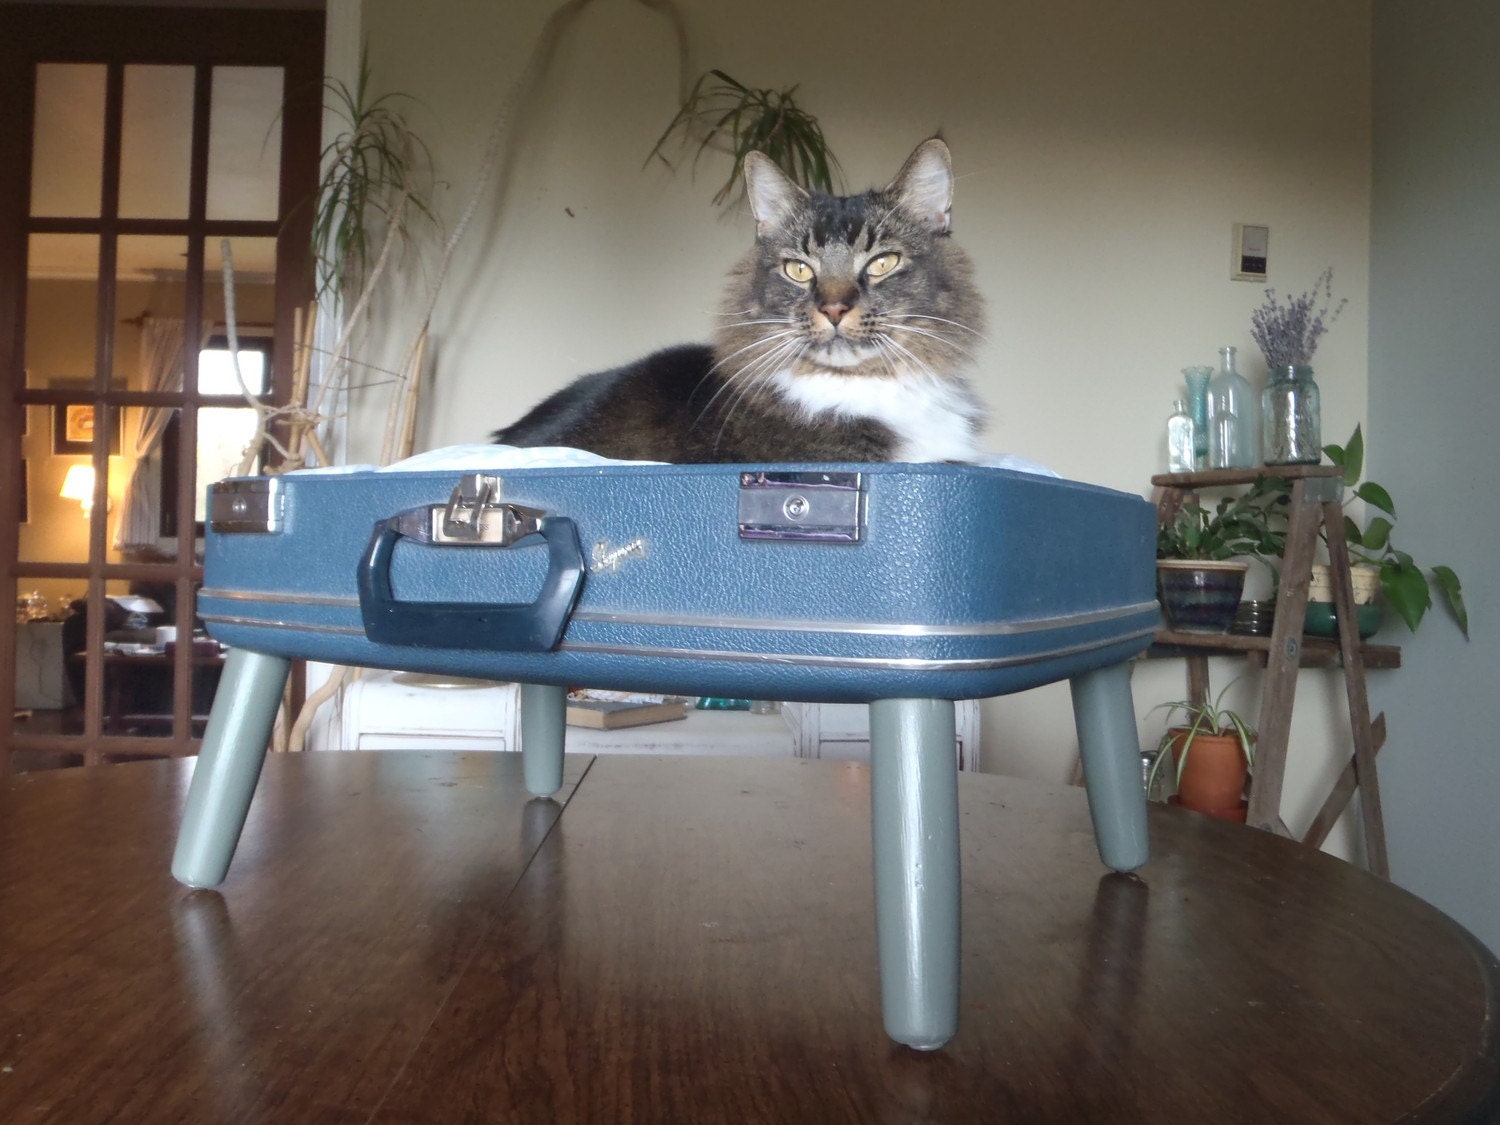 Lovable Luggage Pet Bed - Navy, Grey and White - Retro Modern - 2 dollars goes to carescatshelter